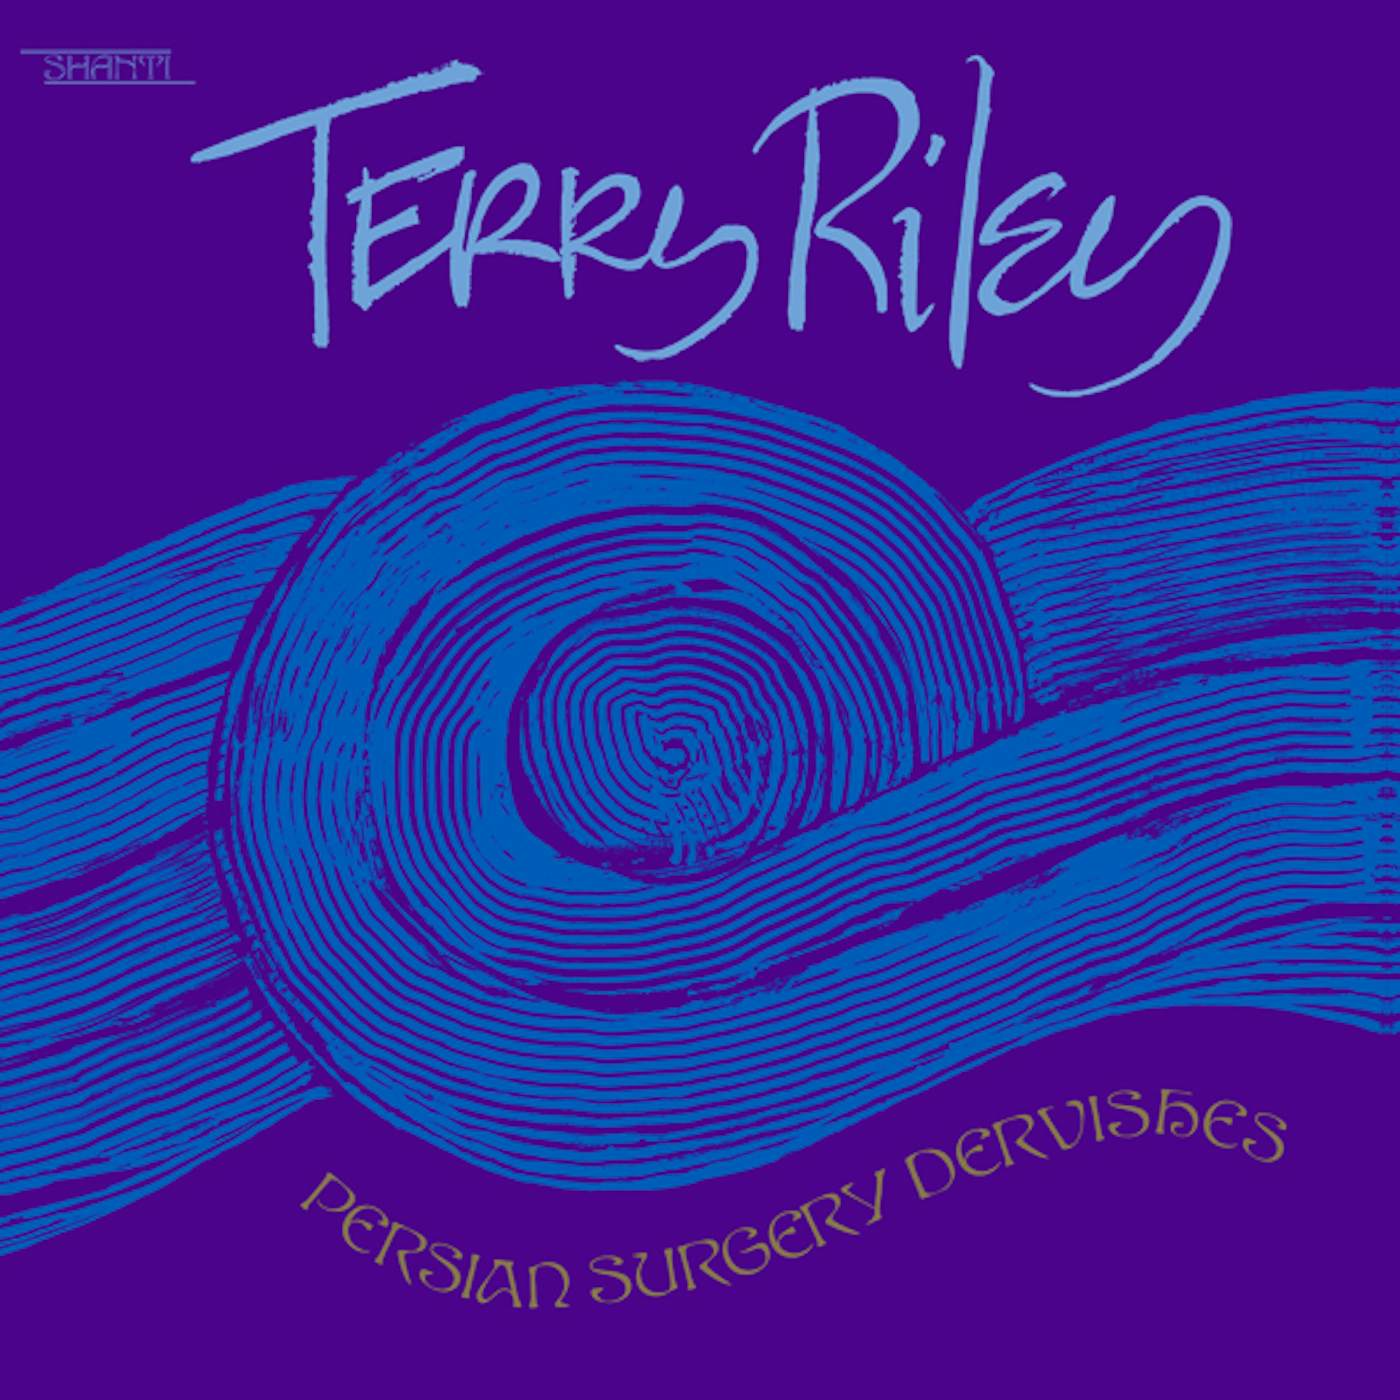 Terry Riley Persian Surgery Dervishes Vinyl Record